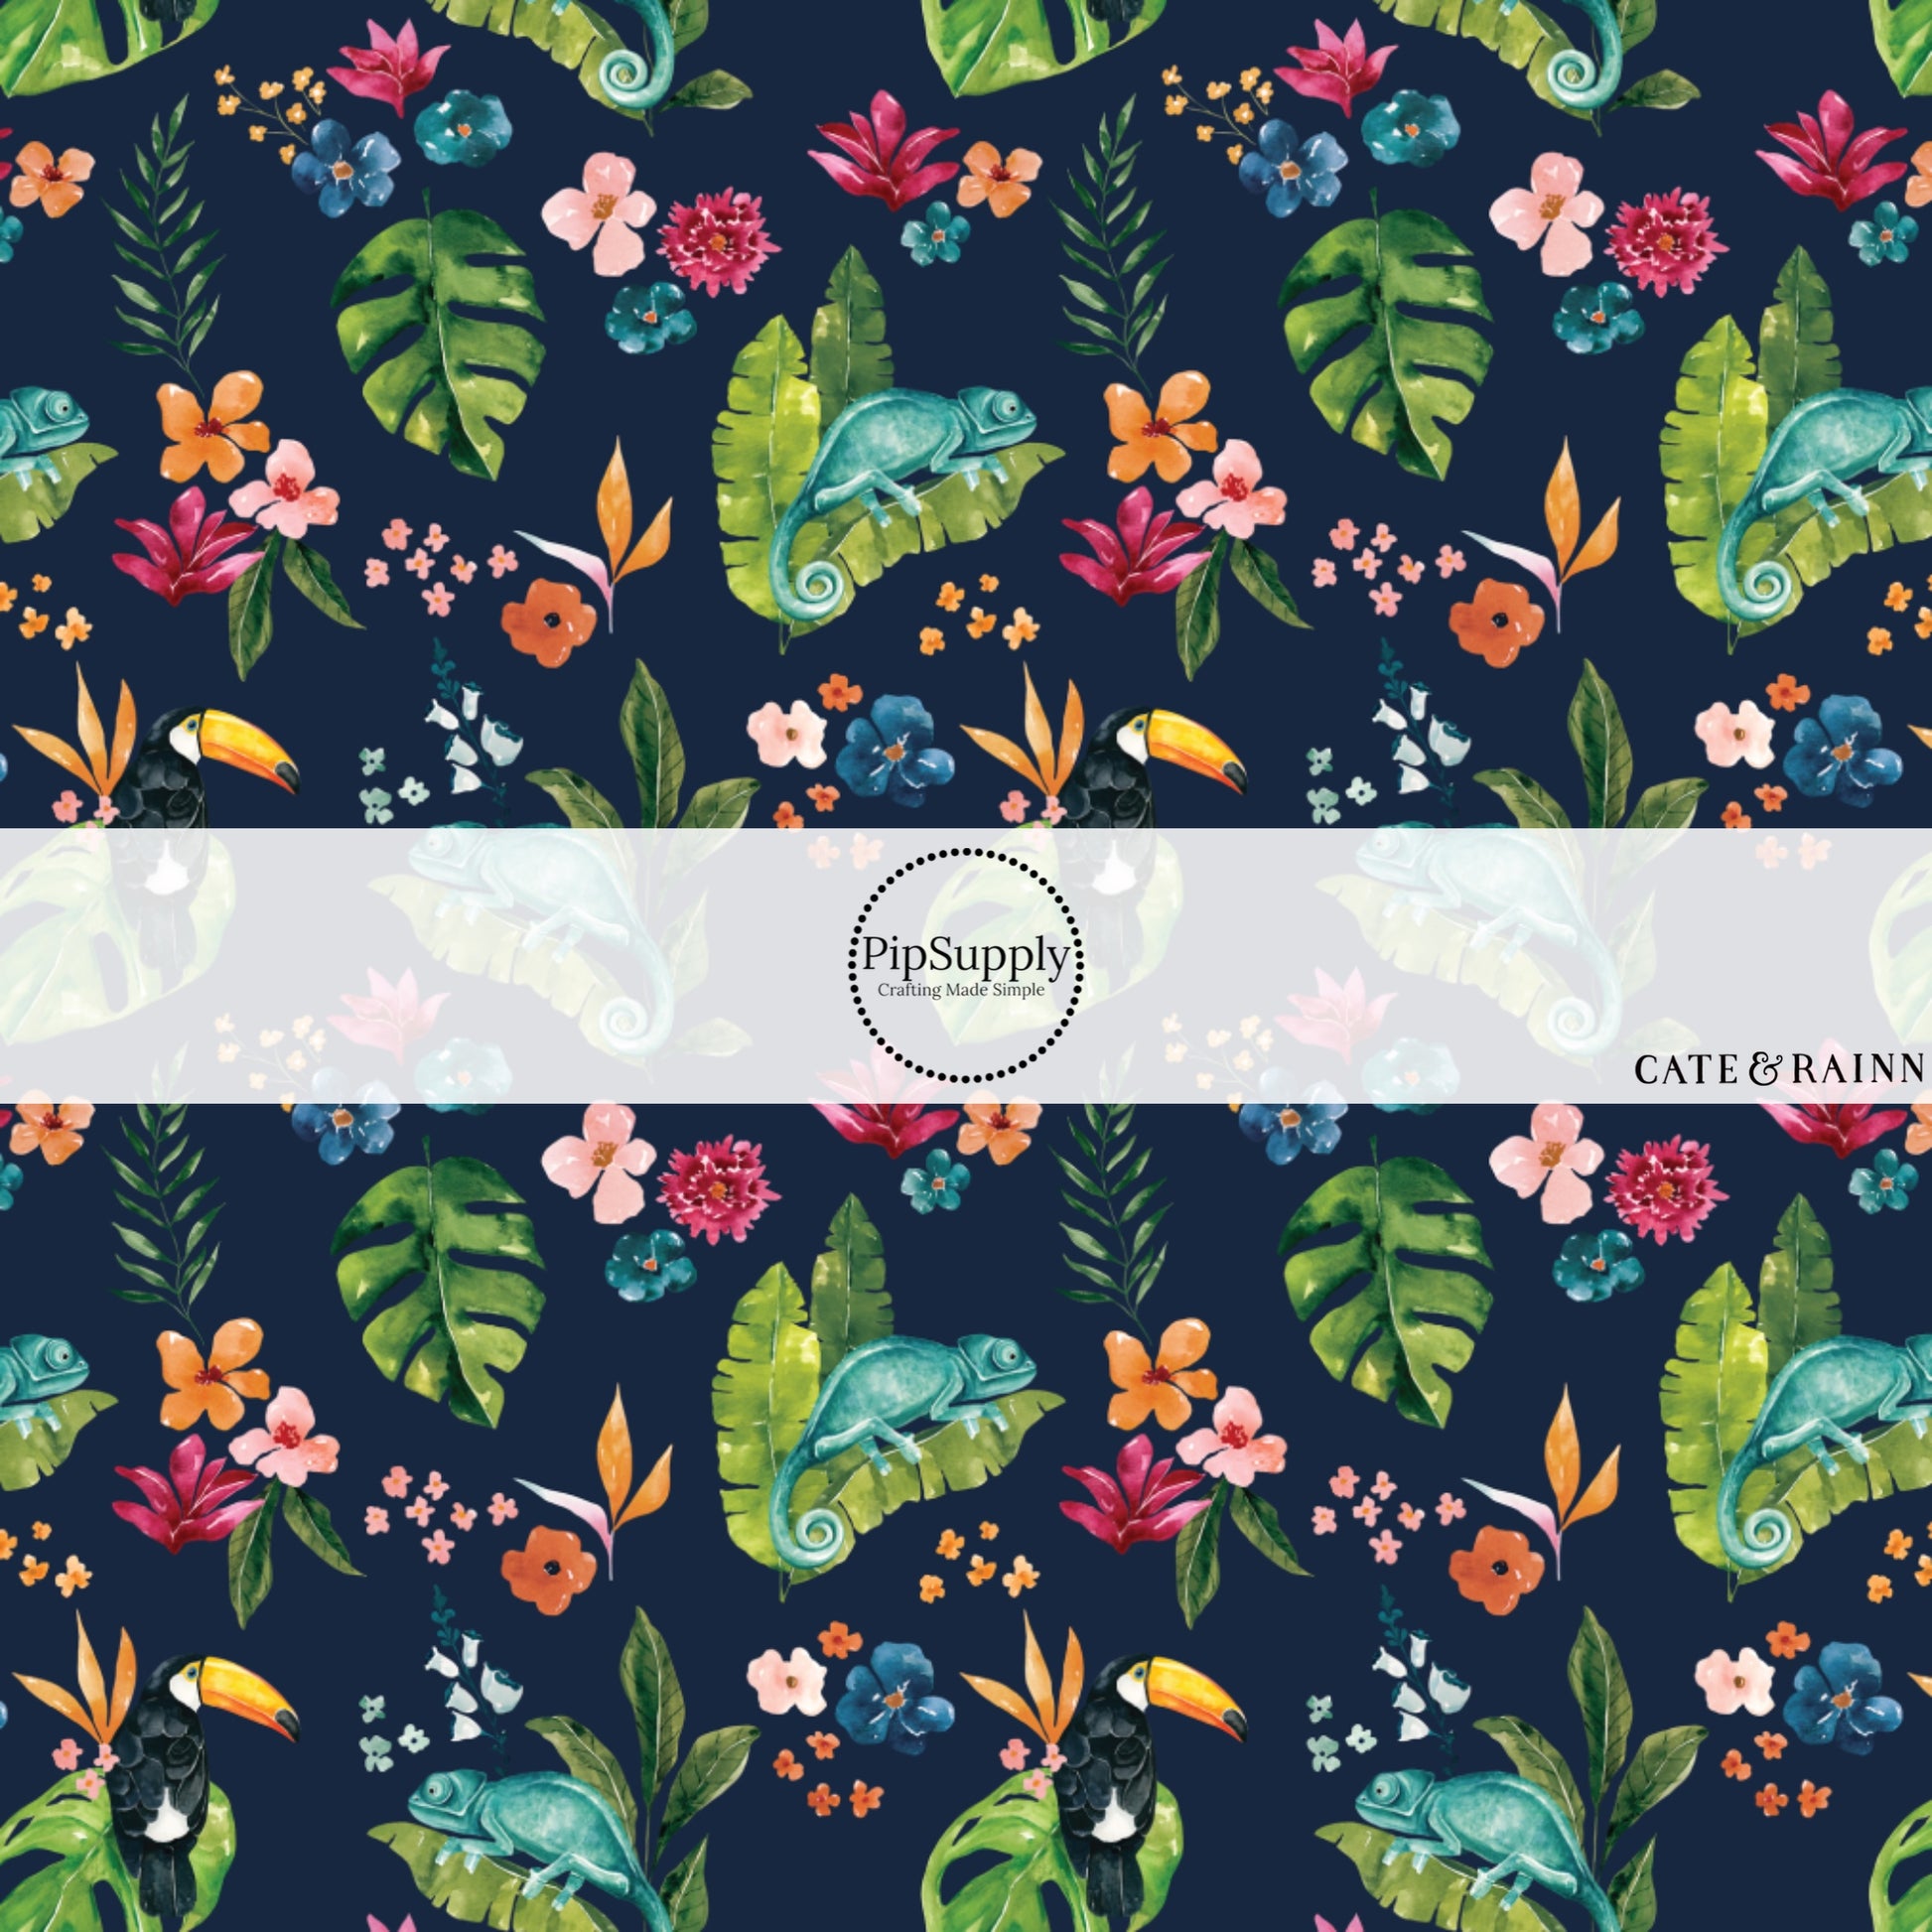 These jungle pattern fabric by the yard features tropical jungle chameleon foliage. This fun fabric can be used for all your sewing and crafting needs!